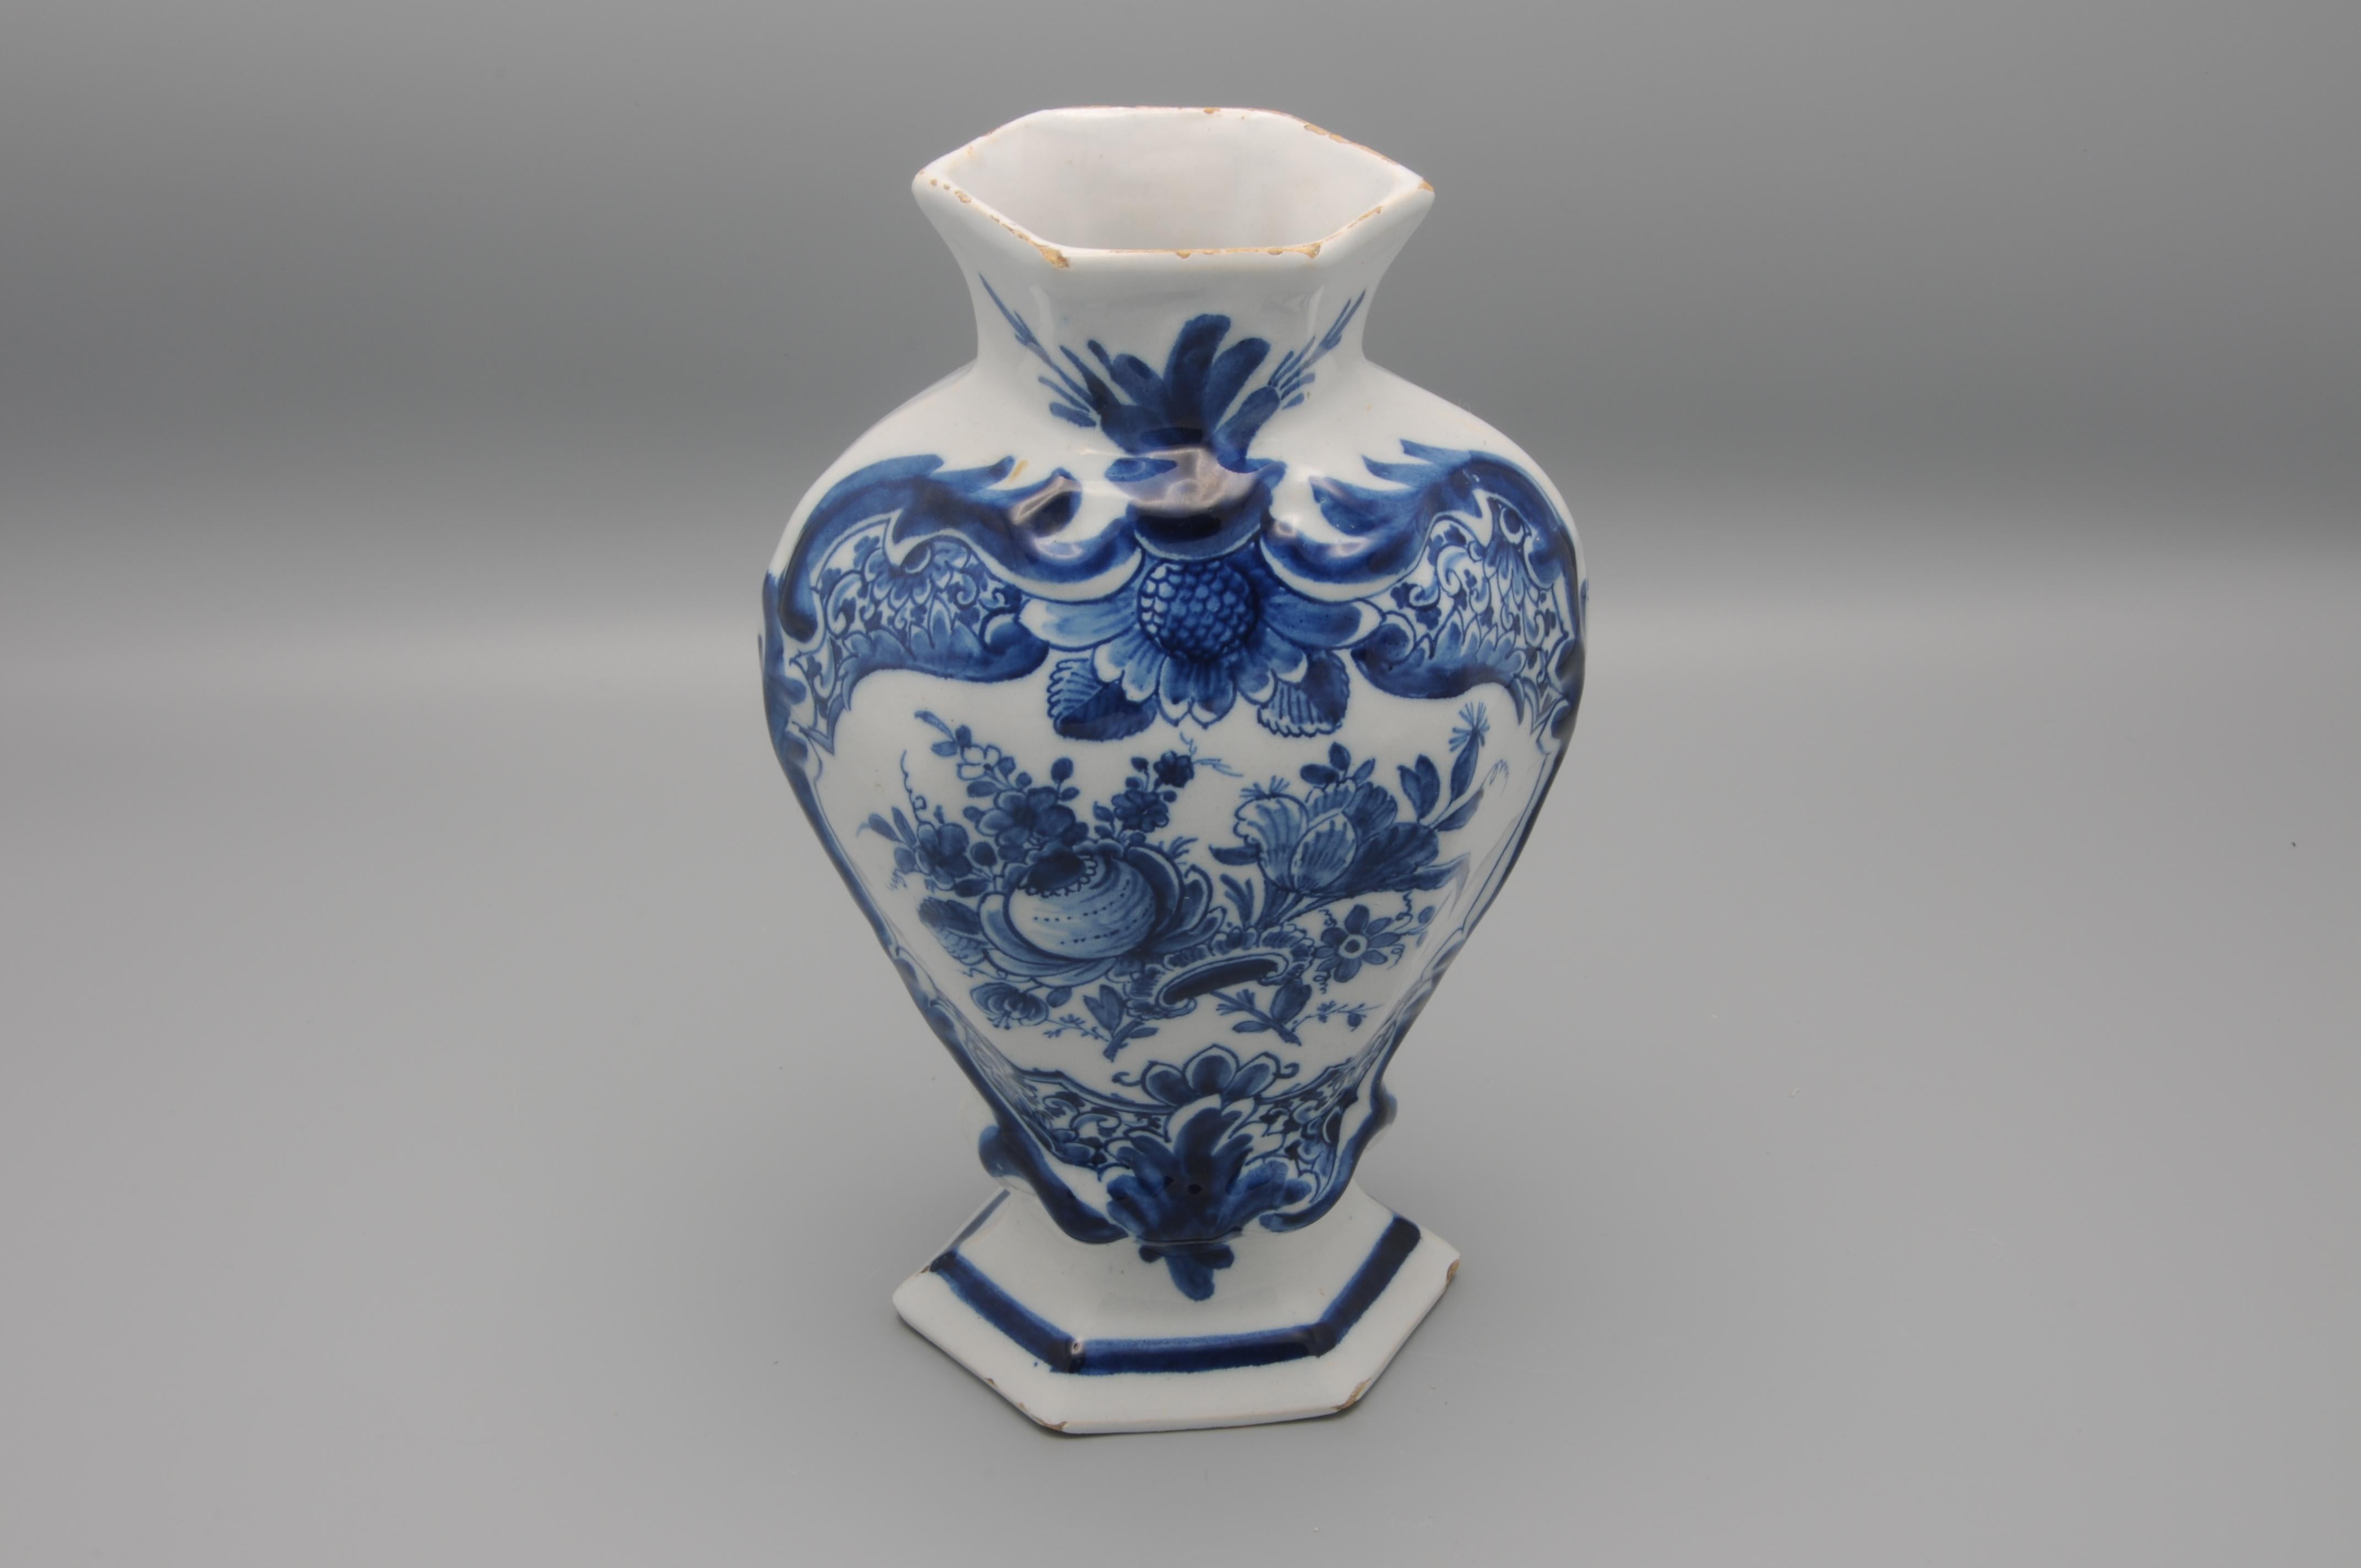 Second half 18th century Blue Delftware vase with central decoration of a flower bouquet within in a slightly raised cartouche. 

Very good condition; only light wear to the rims and some minor chipping
Marked on underside with figurative 'claw' for